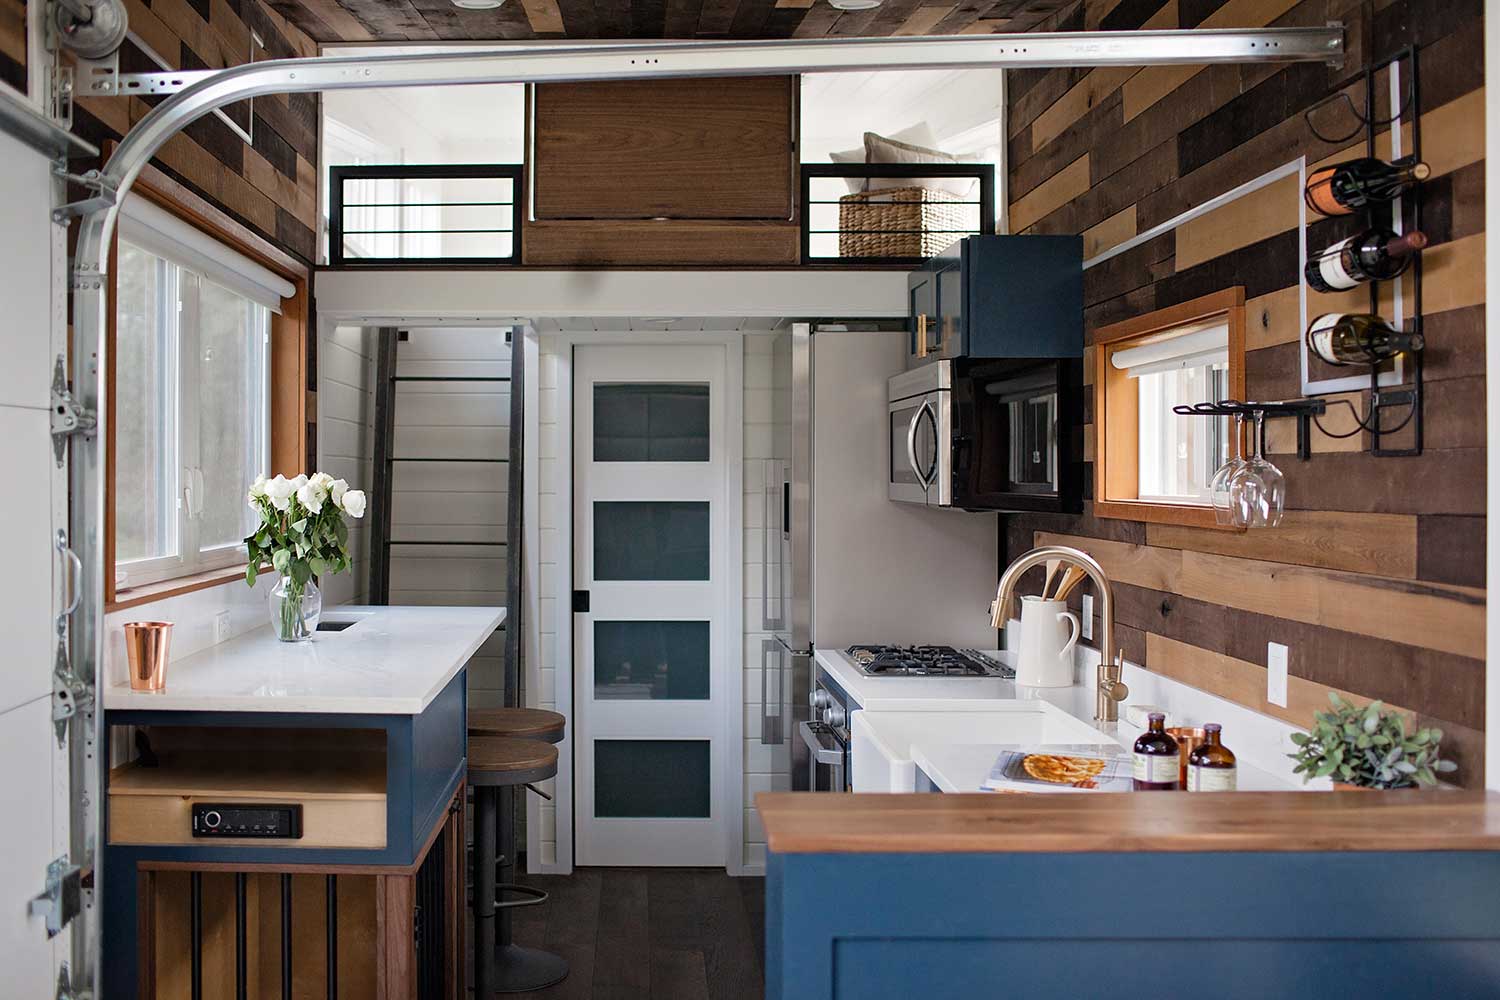 10 Prefab Tiny Homes For Sale So You Can Buy Prebuilt - The Good Trade